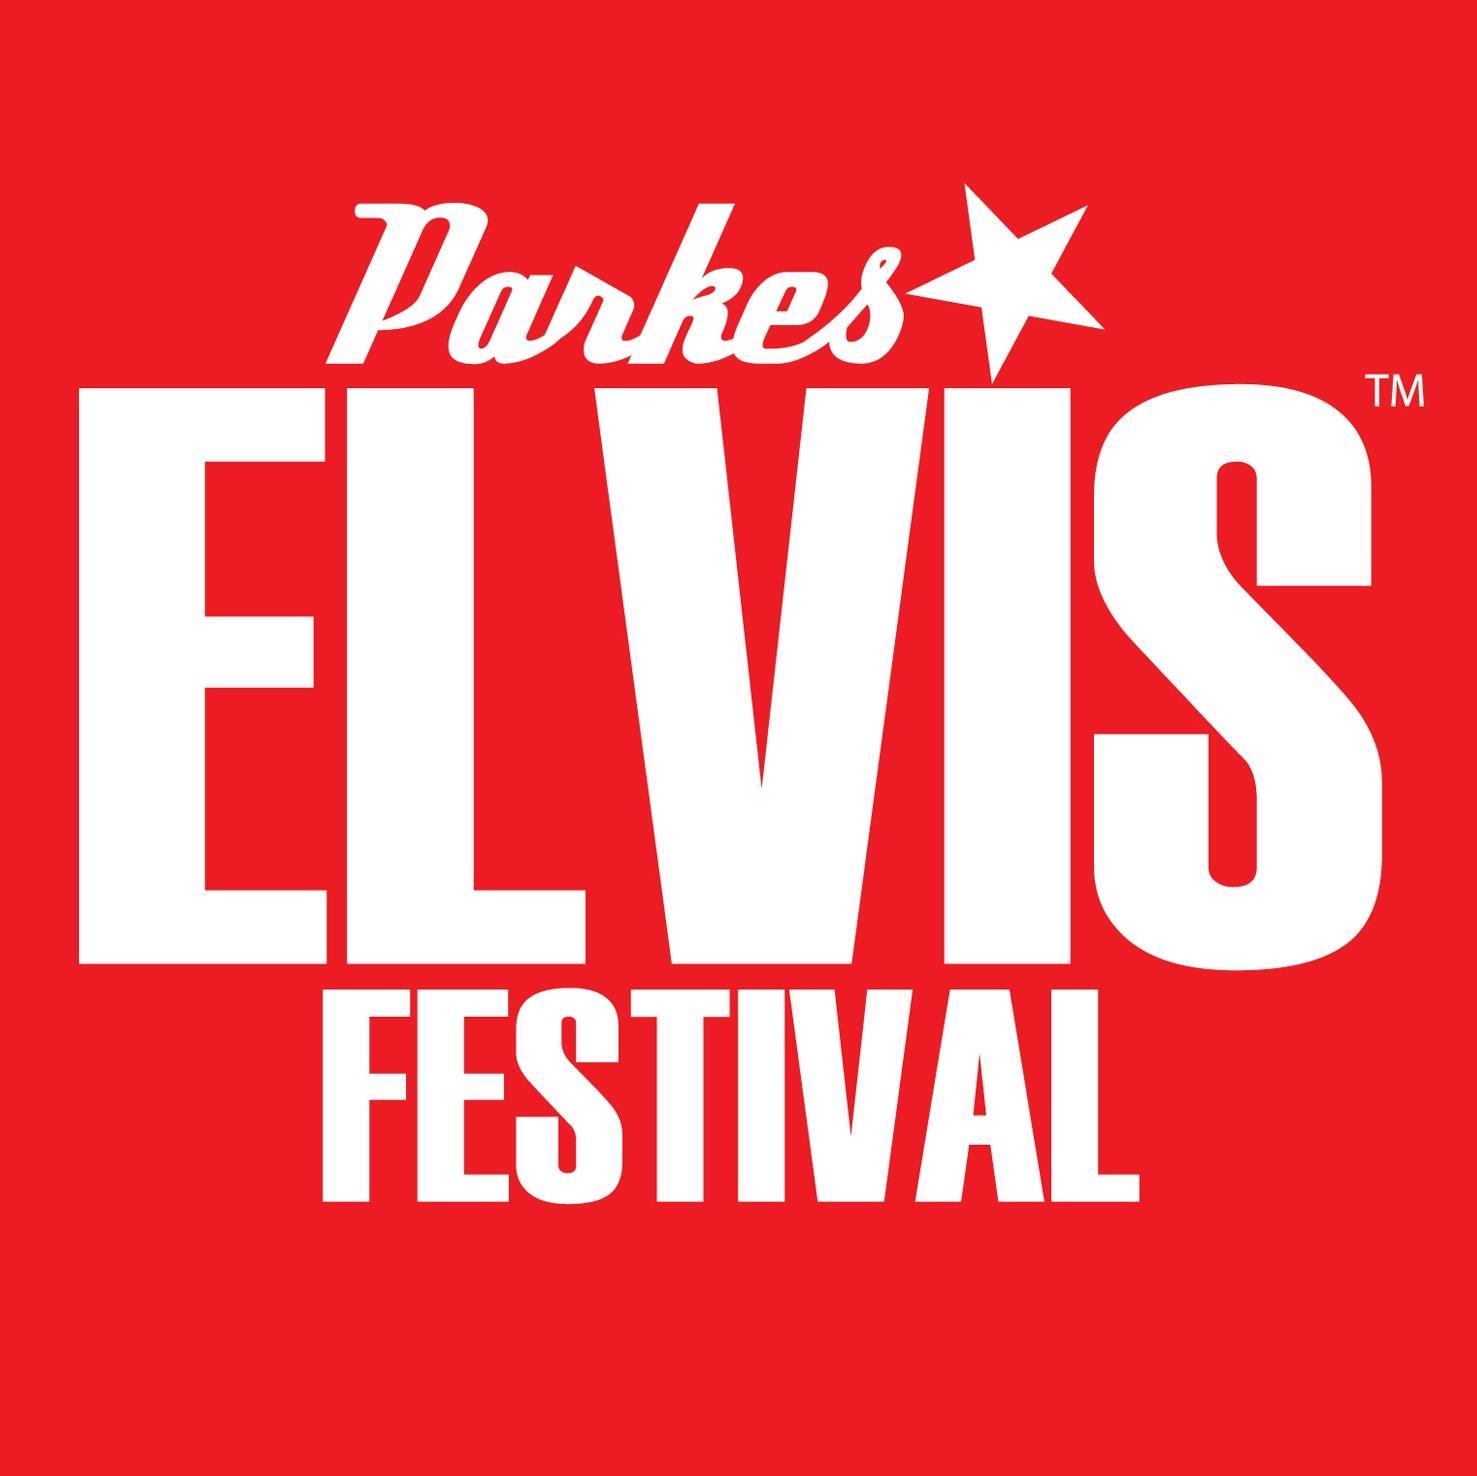 Around 25,000 fans gather in Parkes, Australia to celebrate Elvis' life and music. Join us, 10-14 January 2024, 'Jailhouse Rock' is the theme.